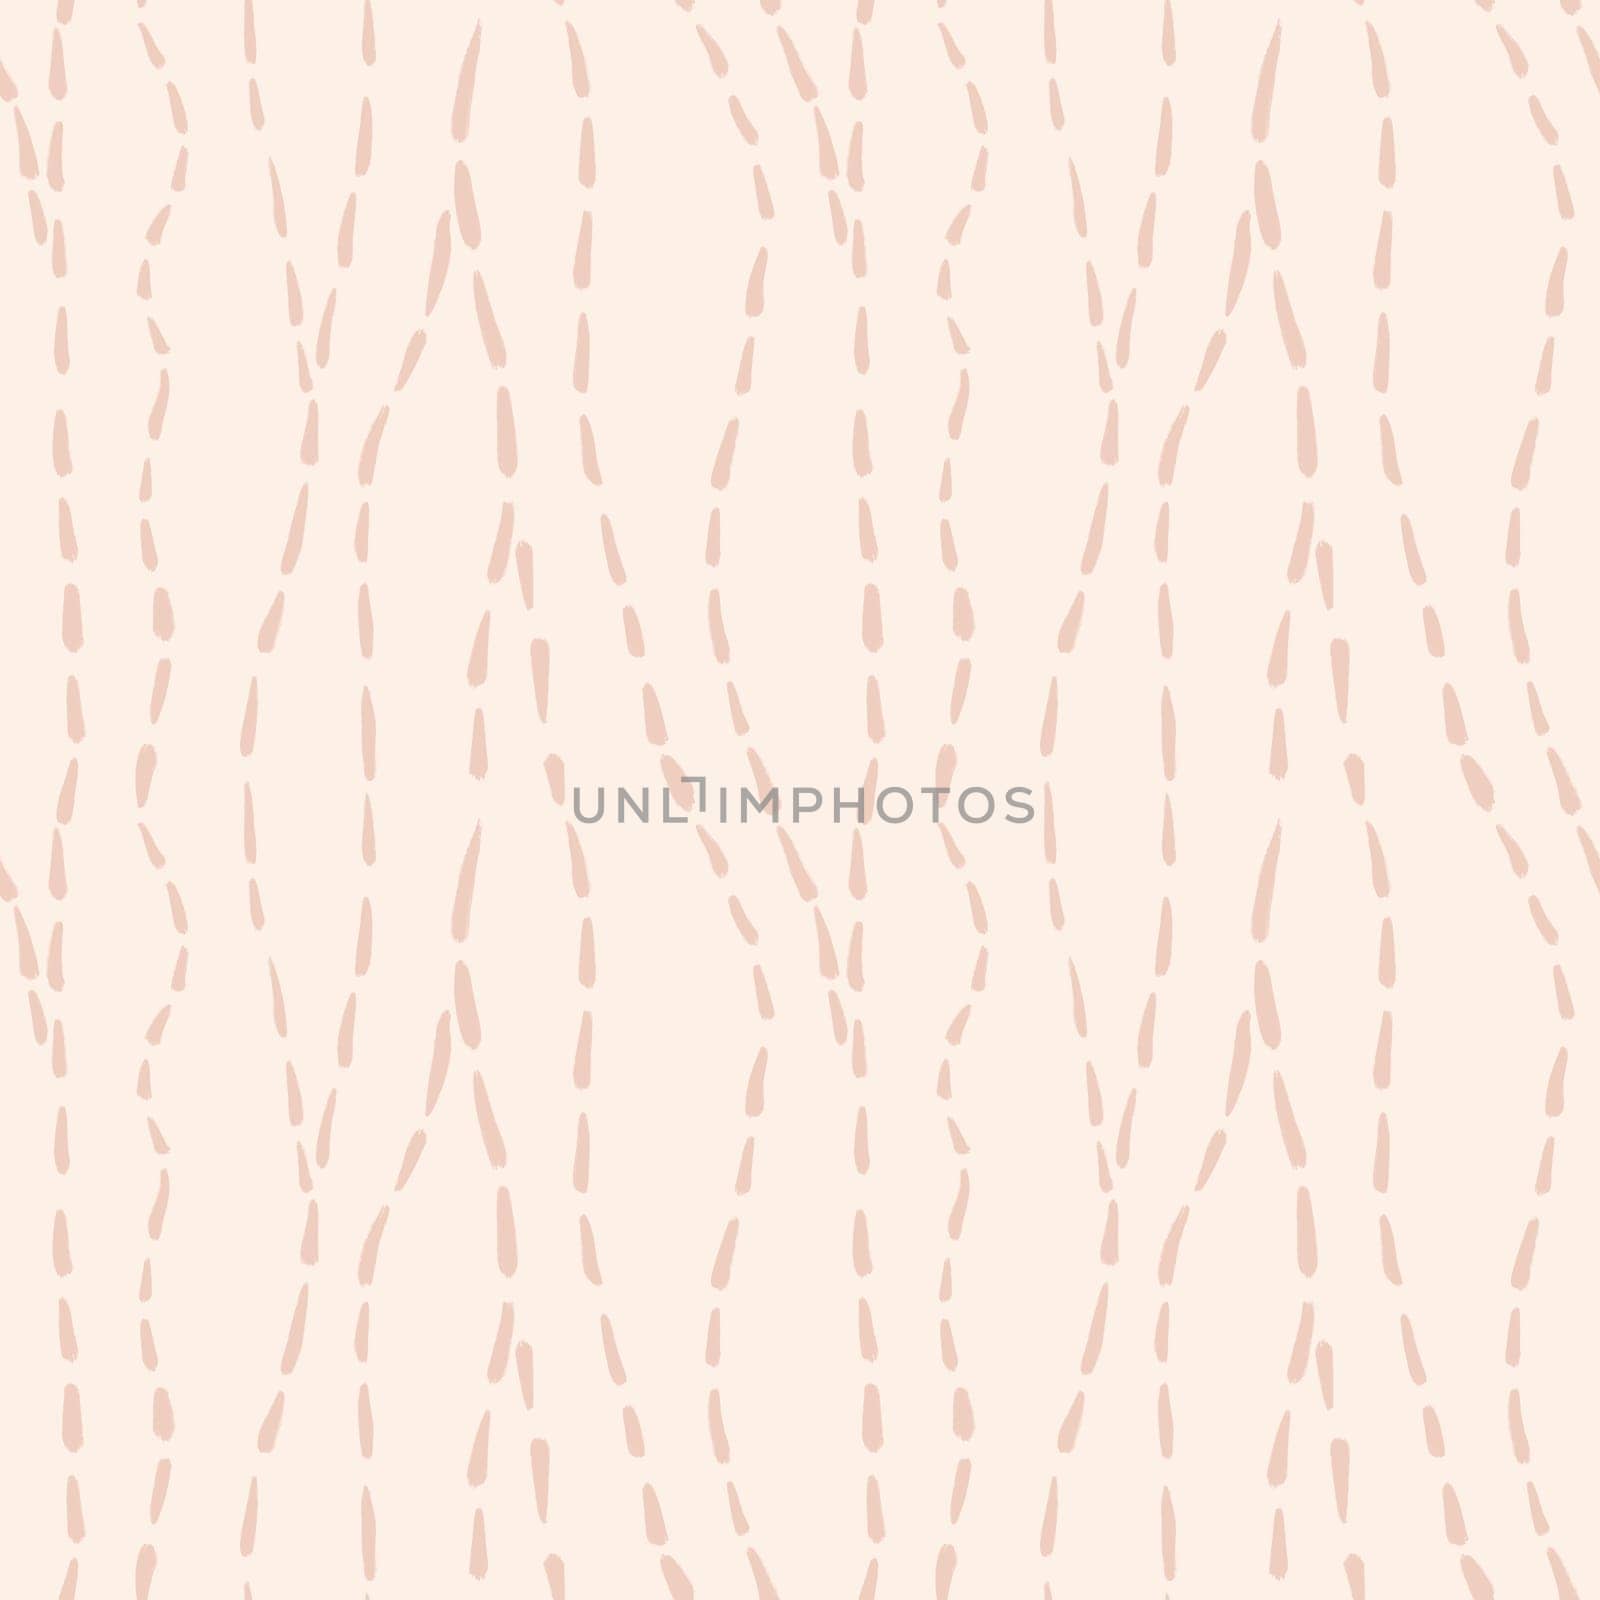 Hand drawn seamless pattern with minimalist lines waves curves, light beige pastel stripes striped abstract geometric design. Beige apricot blush print, trendy warm colors, creative stroke doodle